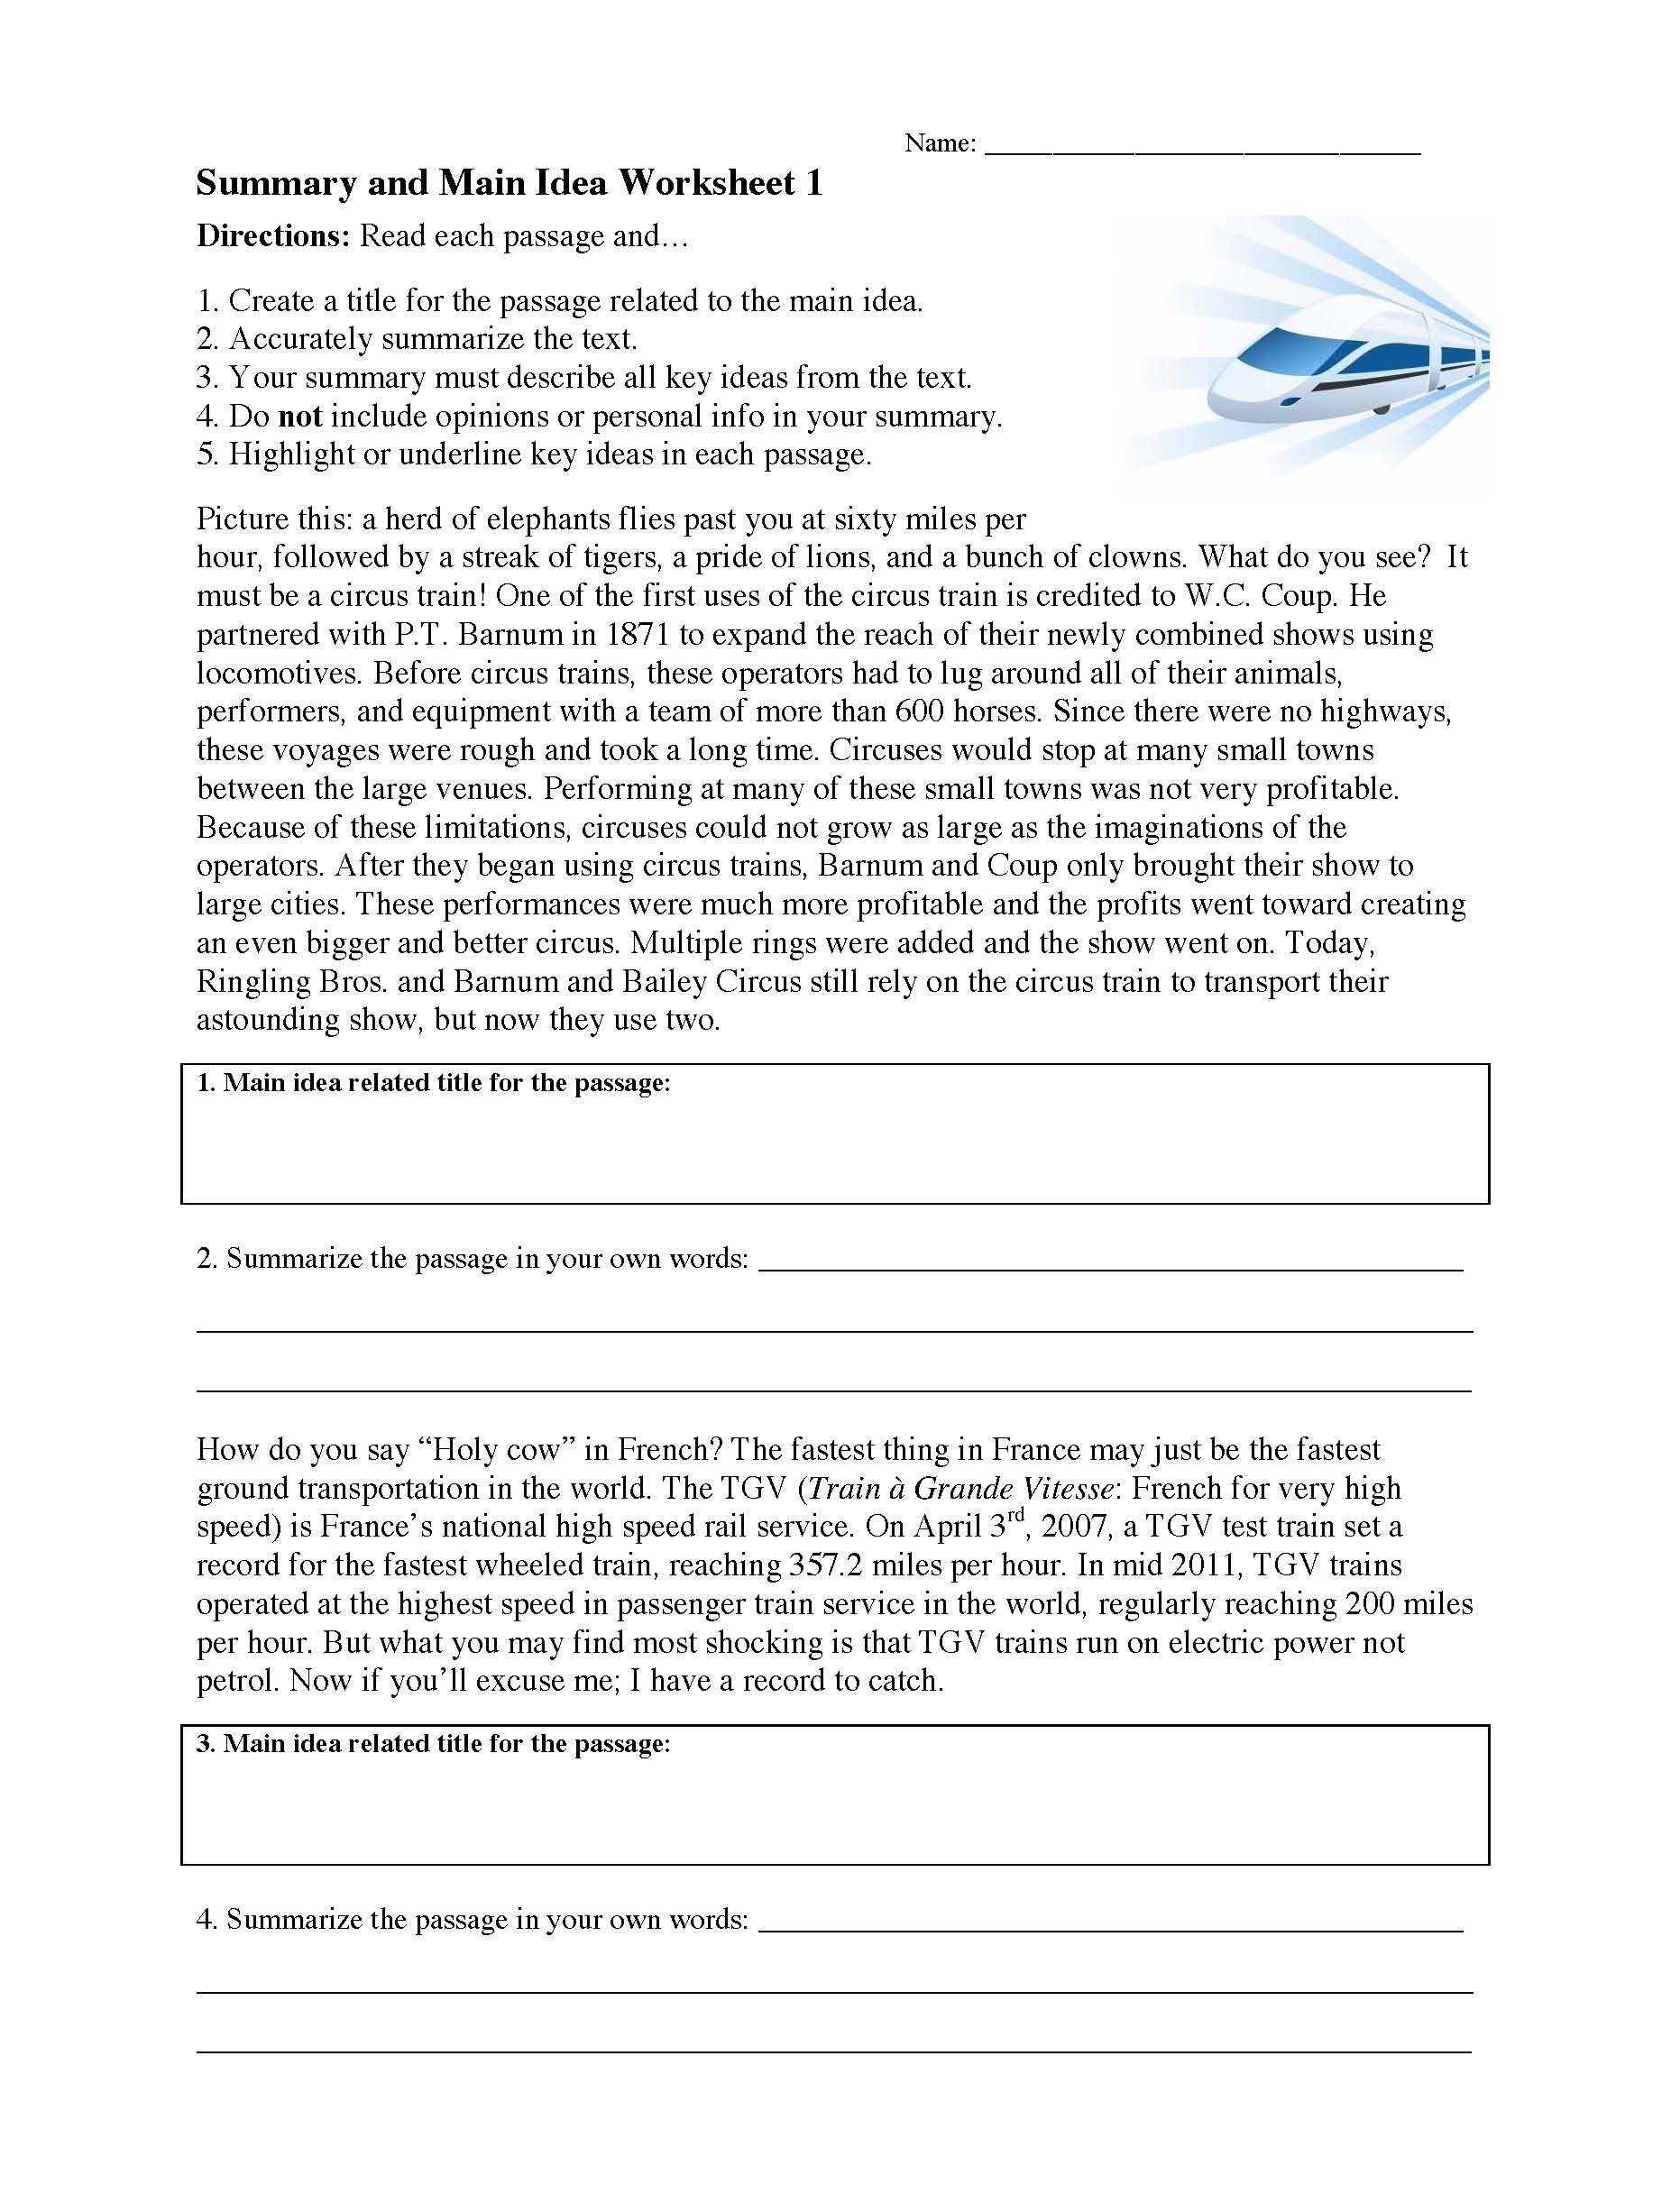 This is a preview image of Summarizing Worksheet 1. Click on it to enlarge it or view the source file.